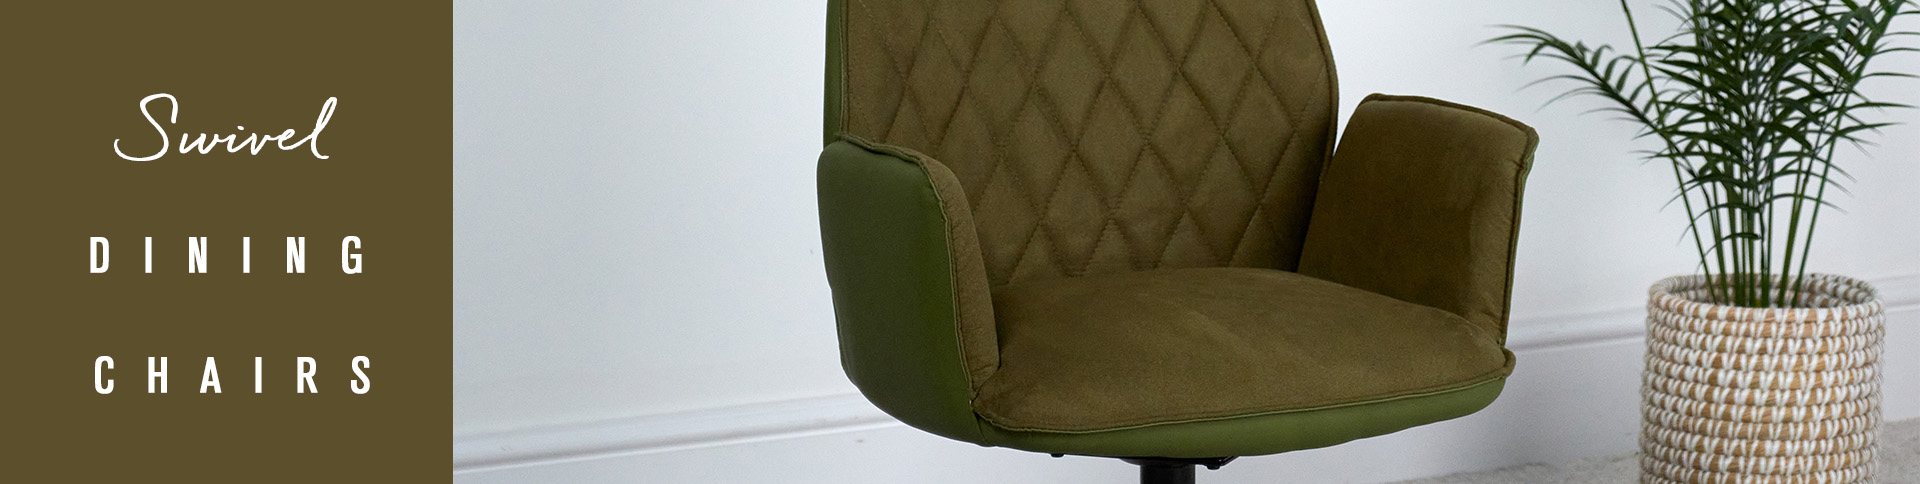 Swivel dining chairs